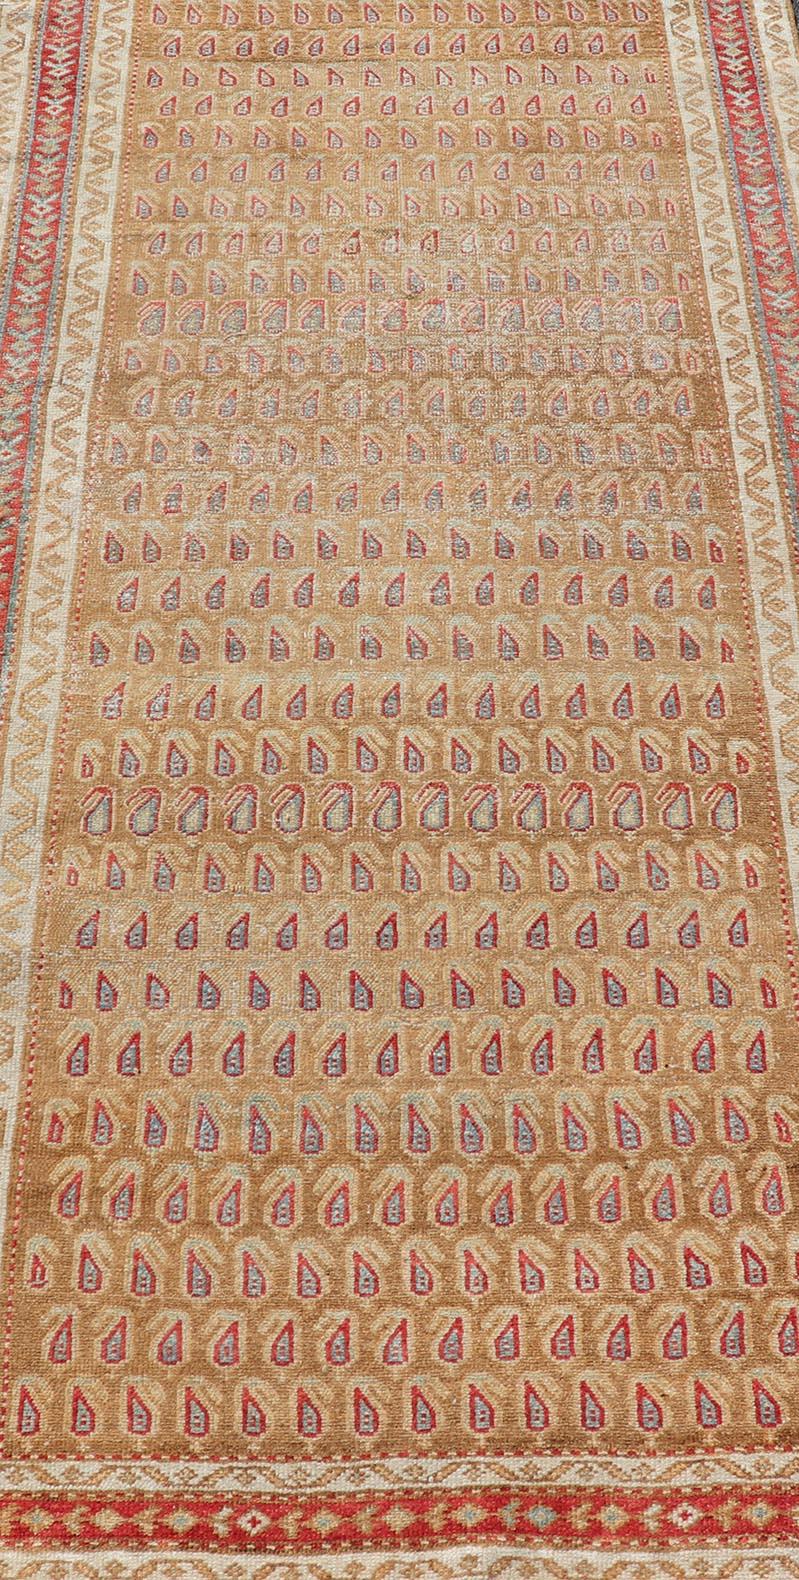 Antique Malayer Runner with All-Over Paisley Design in Red, Brown, and Blue In Good Condition For Sale In Atlanta, GA